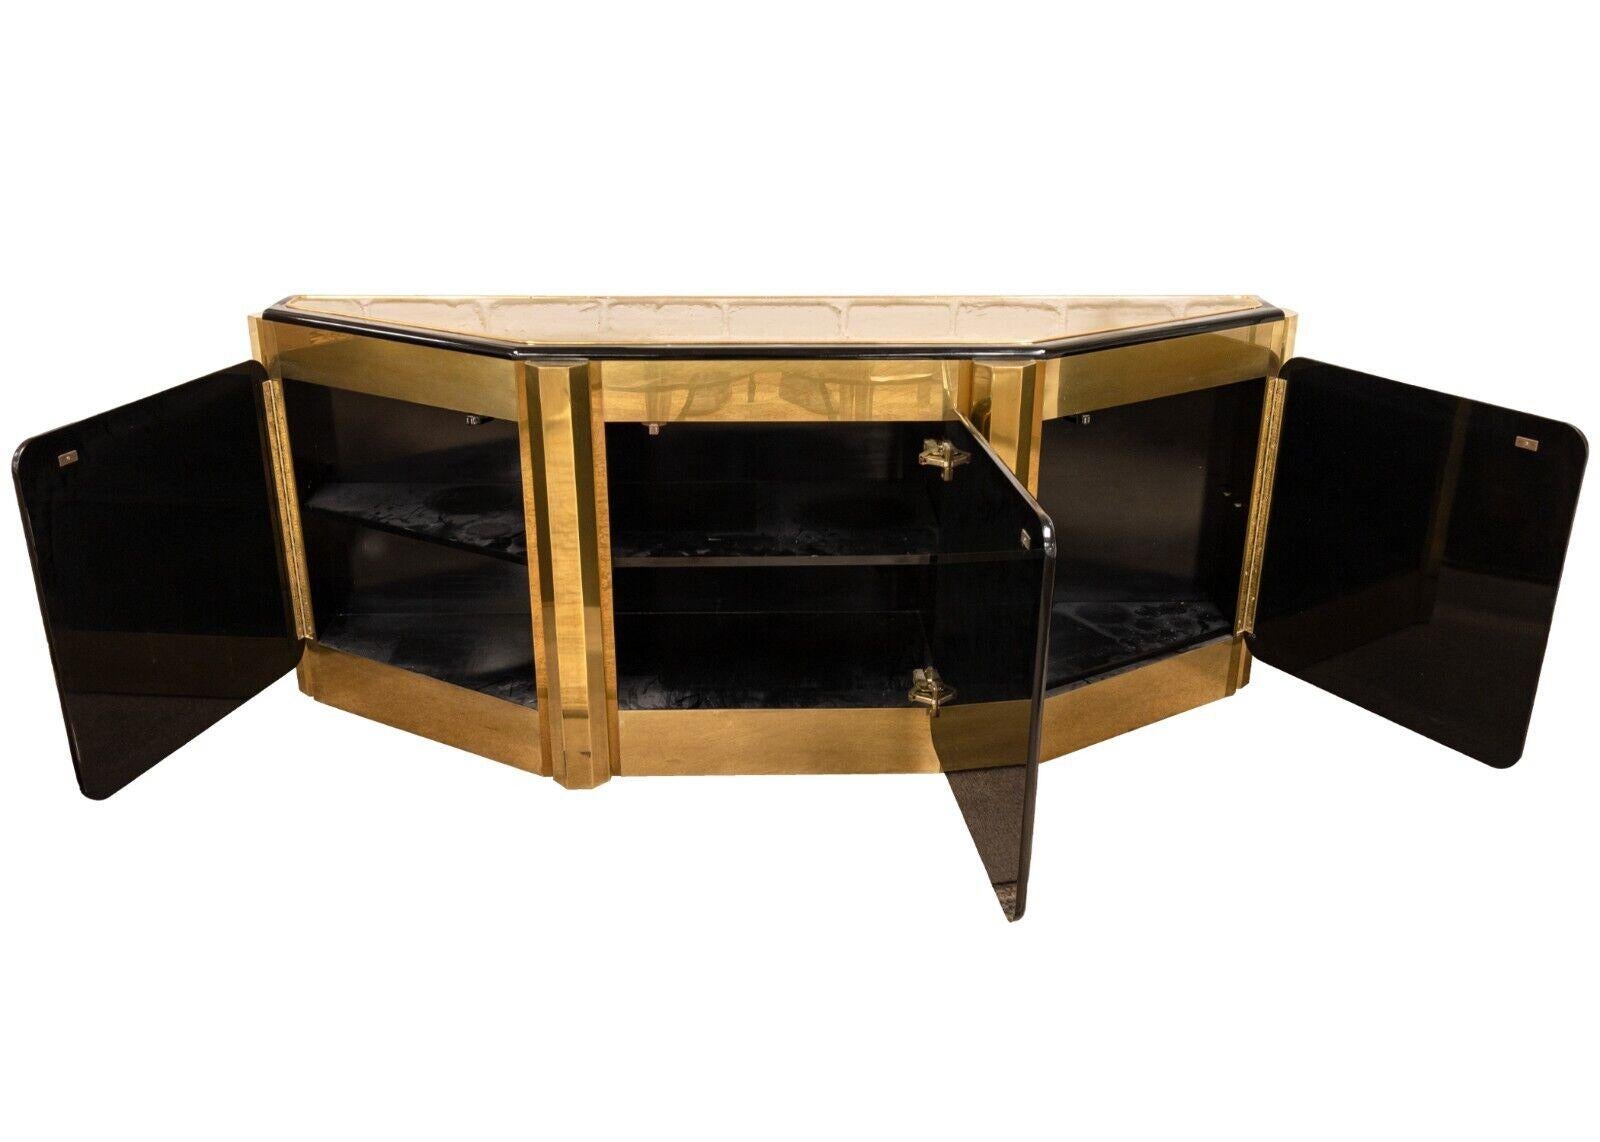 A Bernard Rhone acid etched tree of life credenza for Mastercraft. This gorgeous credenza is a real statement piece. Its bold use of brass construction and deep black accents make for a shining piece of furniture. This piece also prominently